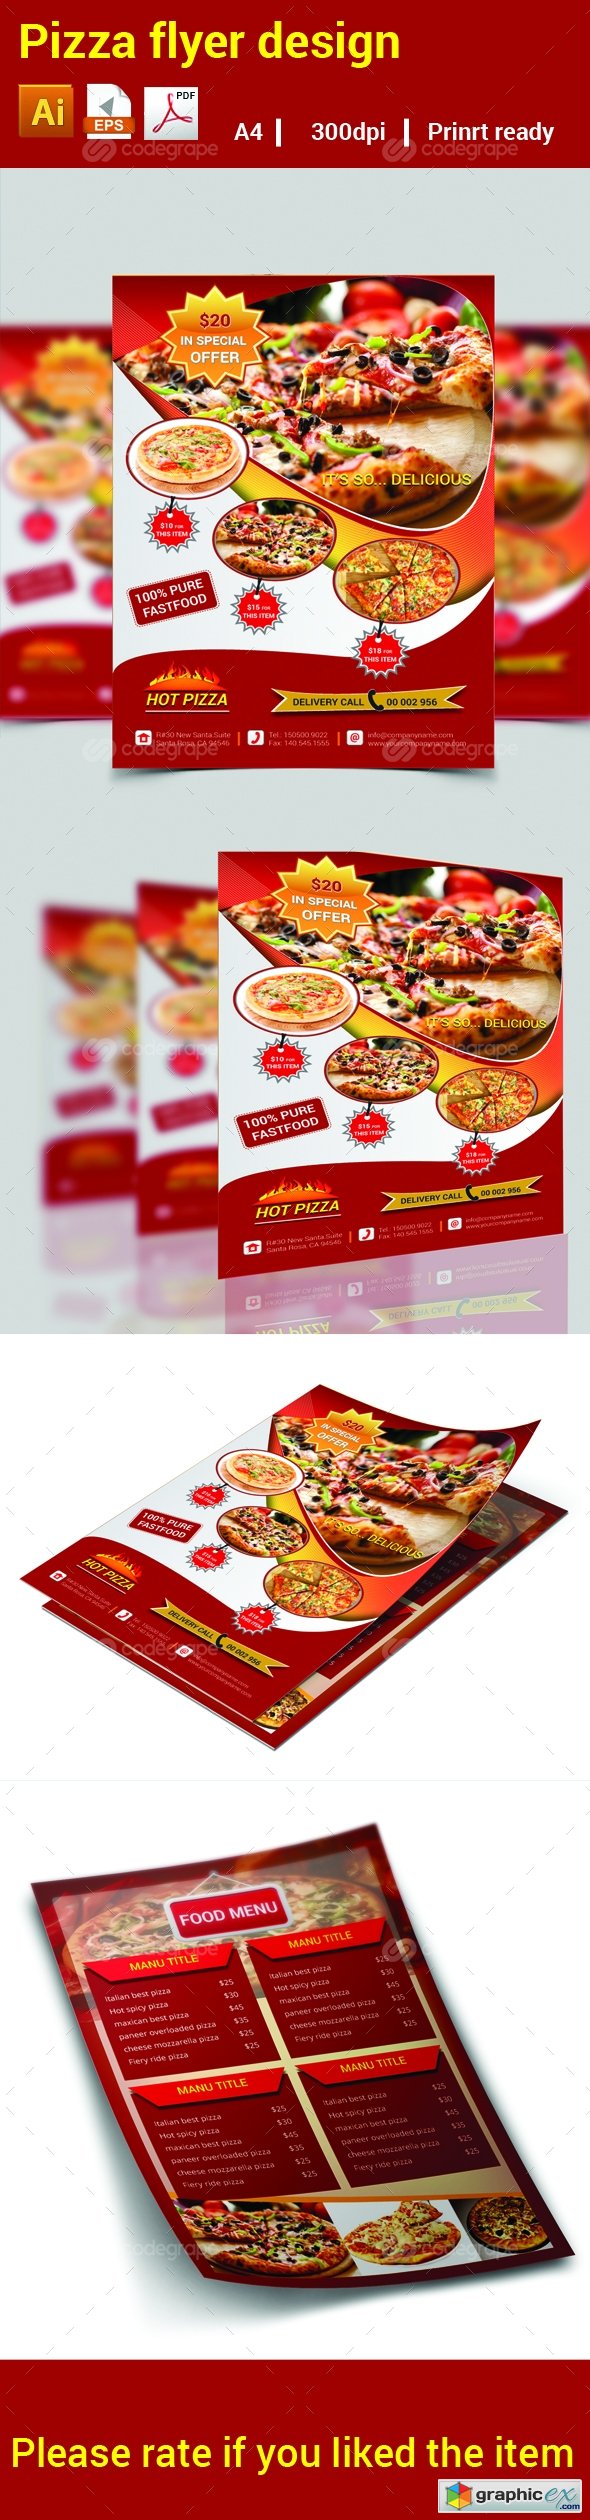 CodeGrappe - Pizza Flyer Design 6288